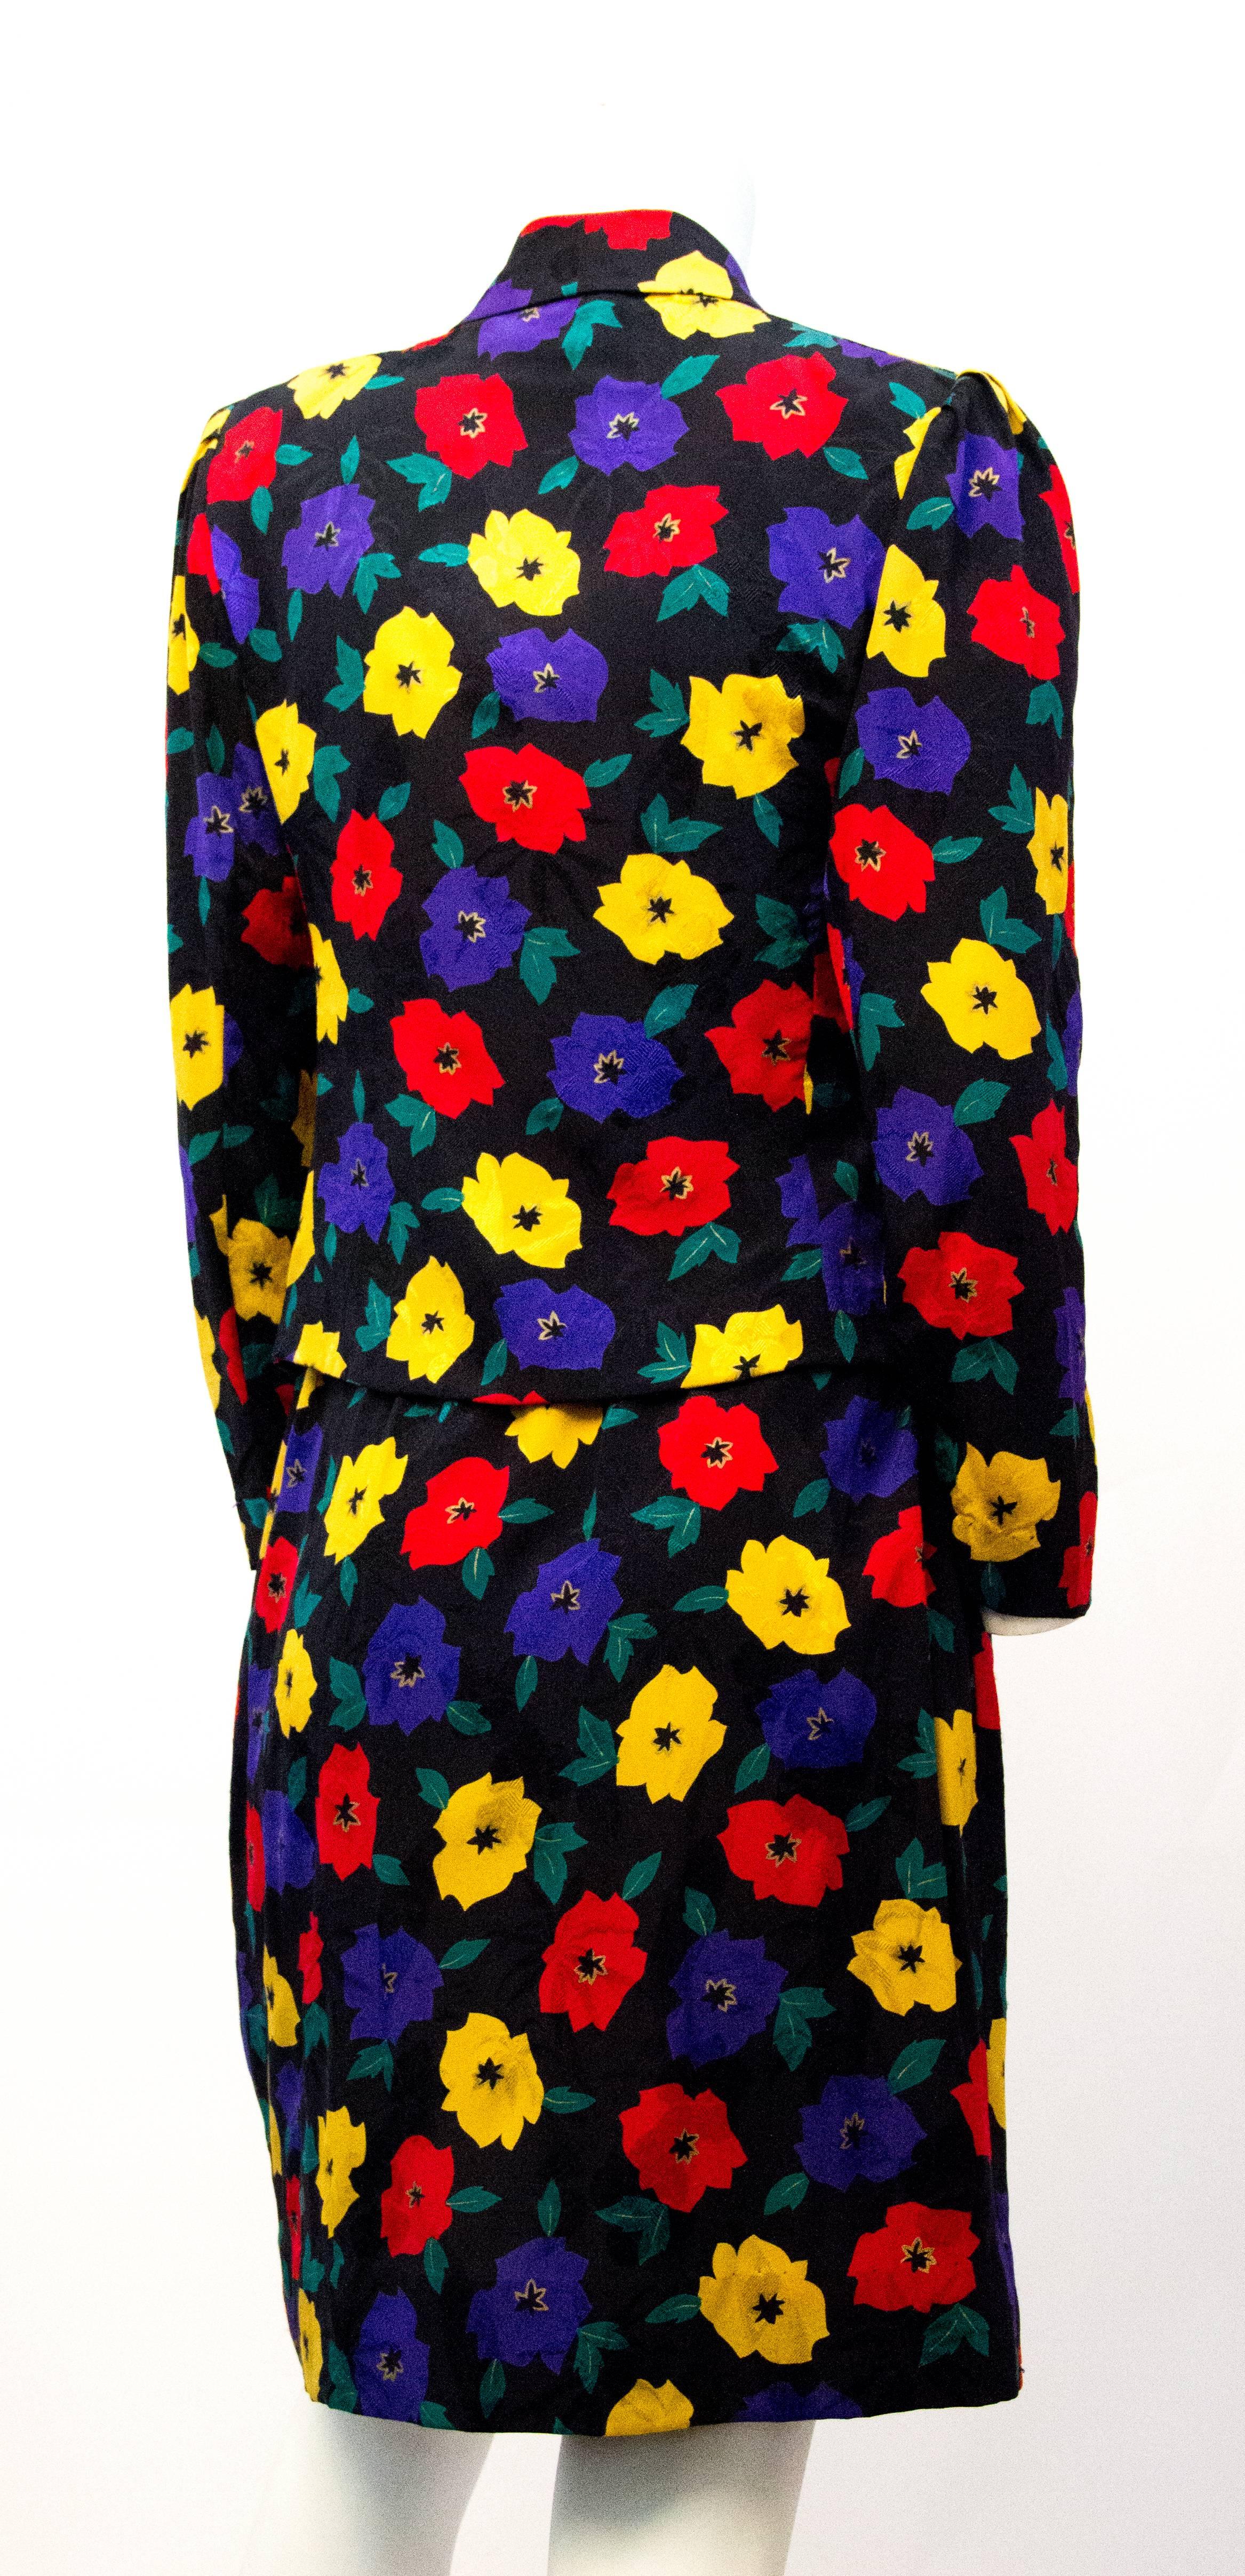 80s Emanuel Ungaro black silk jacquard suit with colorful floral print. Jacket has shoulder pads. Buttons and hooks up the front. Skirt wraps around and fastens with one button at the hip. Set is unlined. 